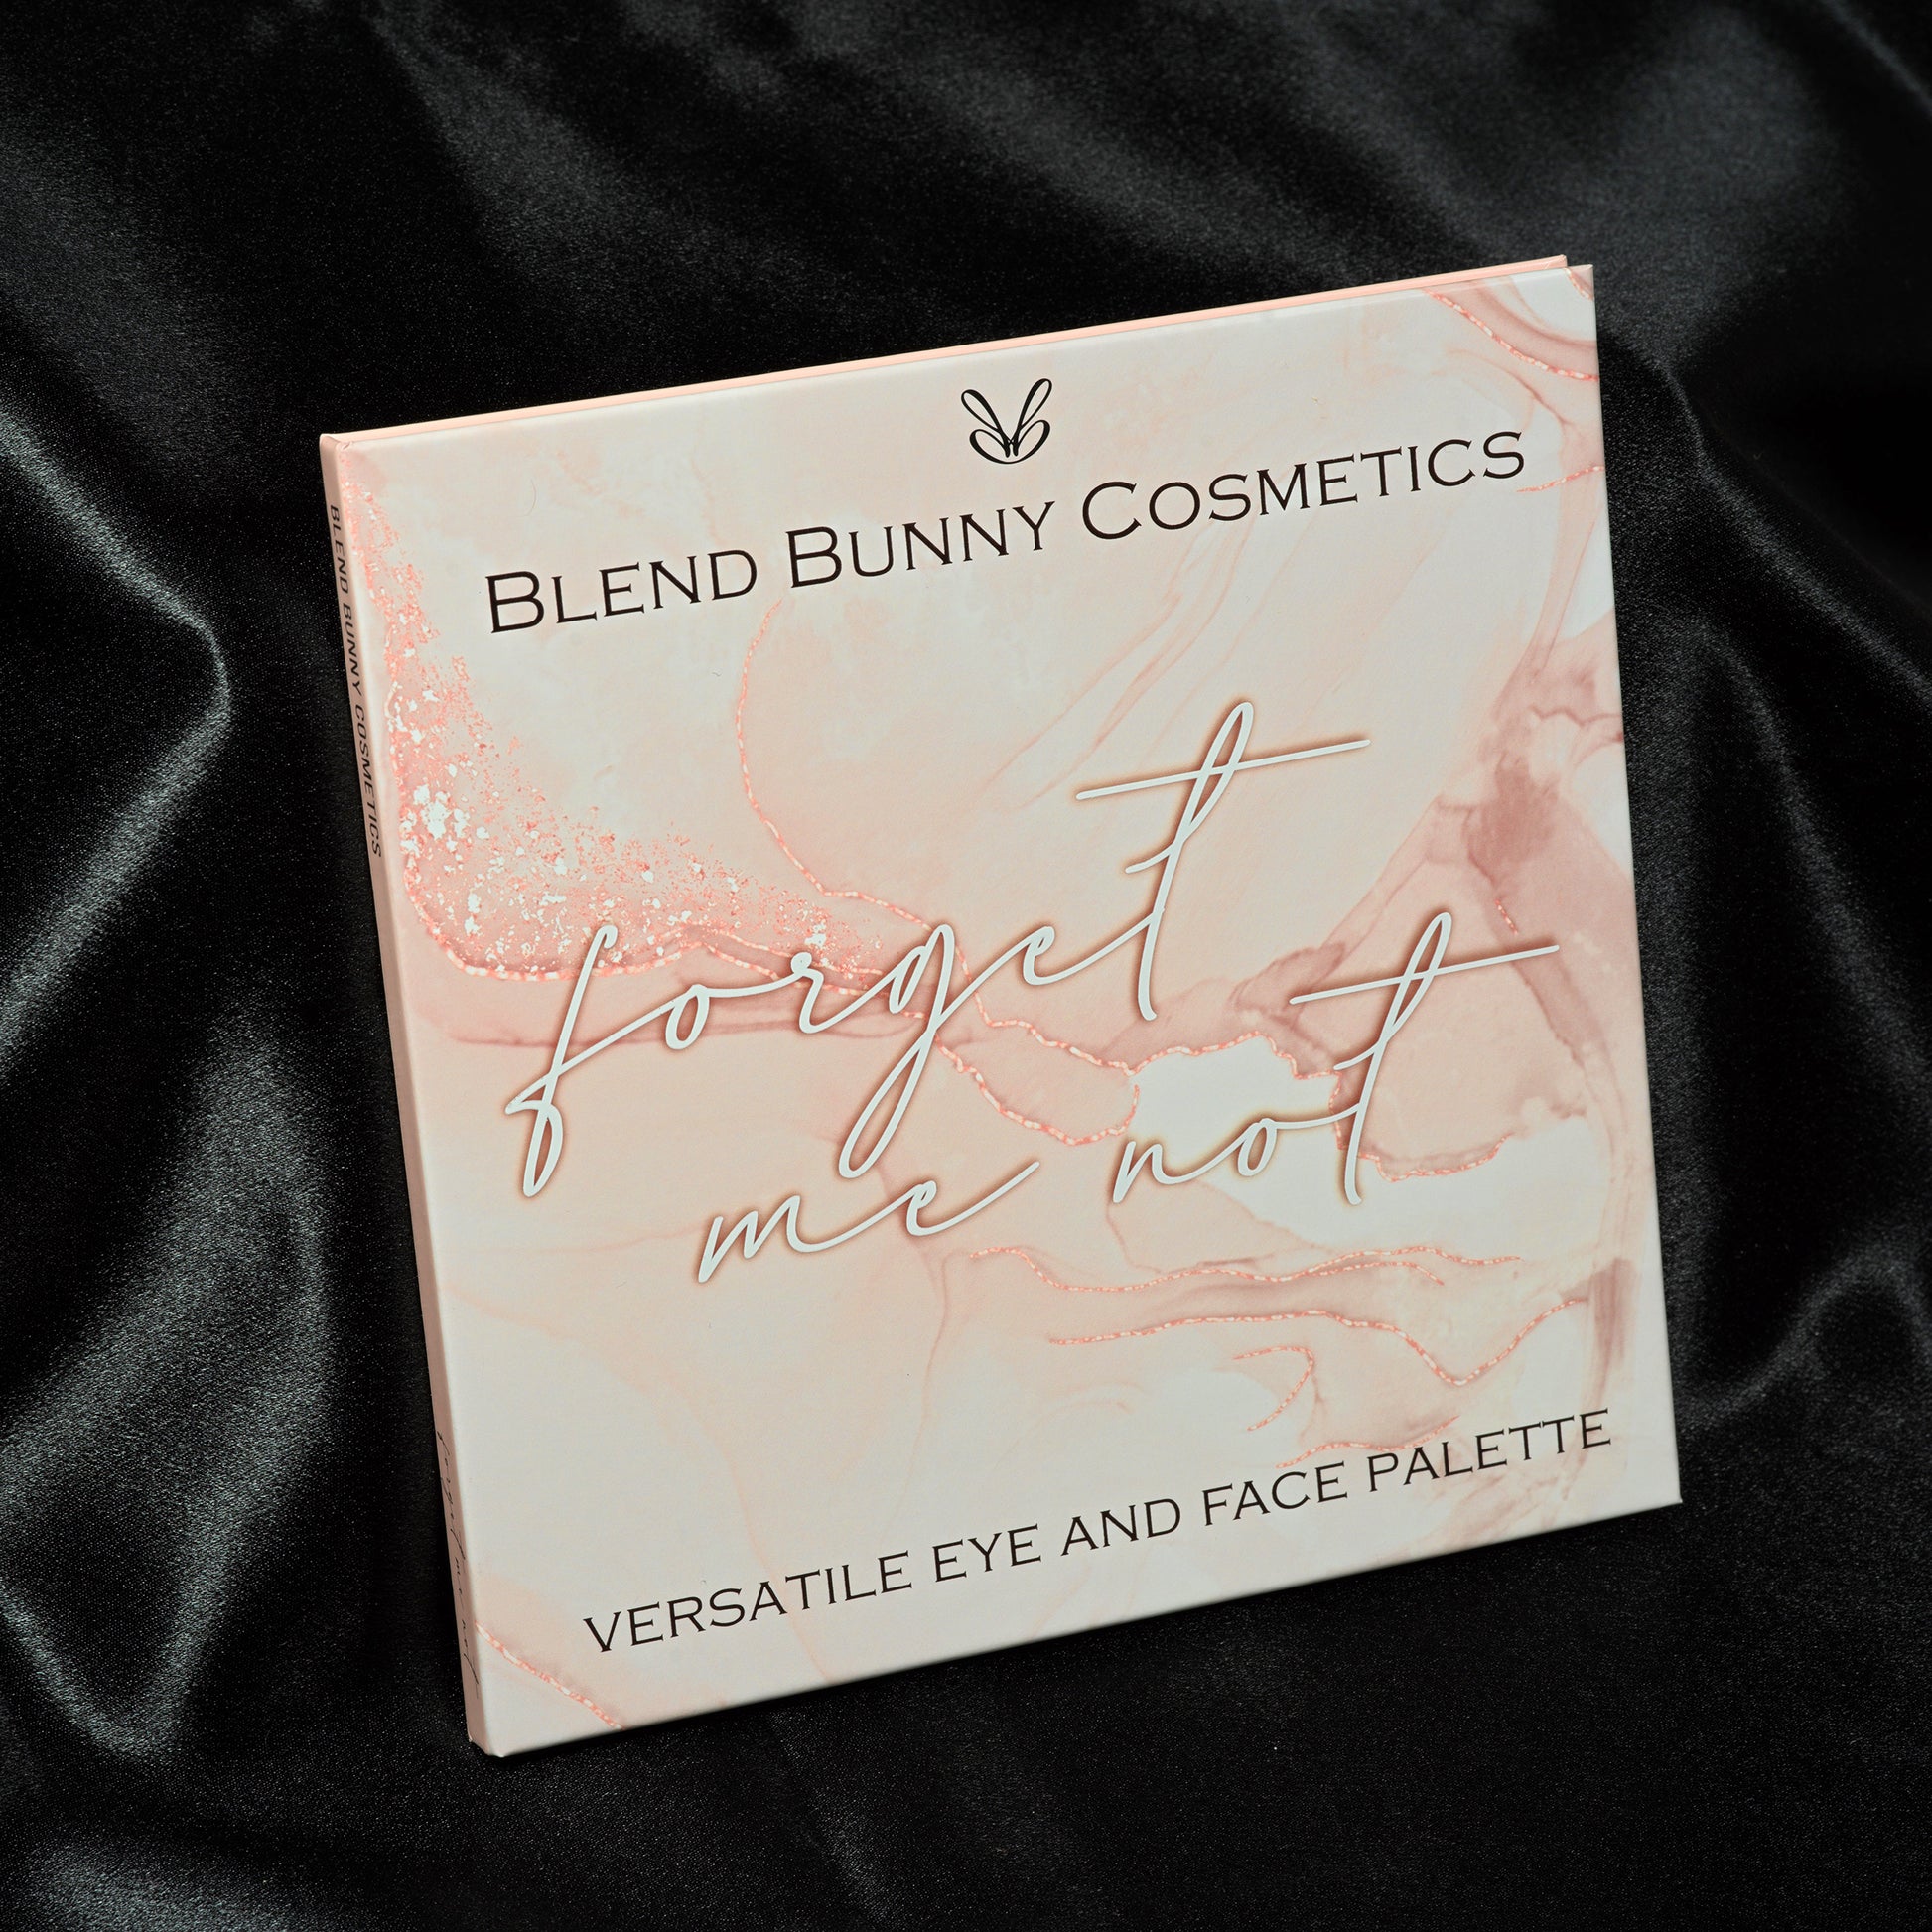 Forget Me Not eyeshadow palette by Blend Bunny Cosmetics closed